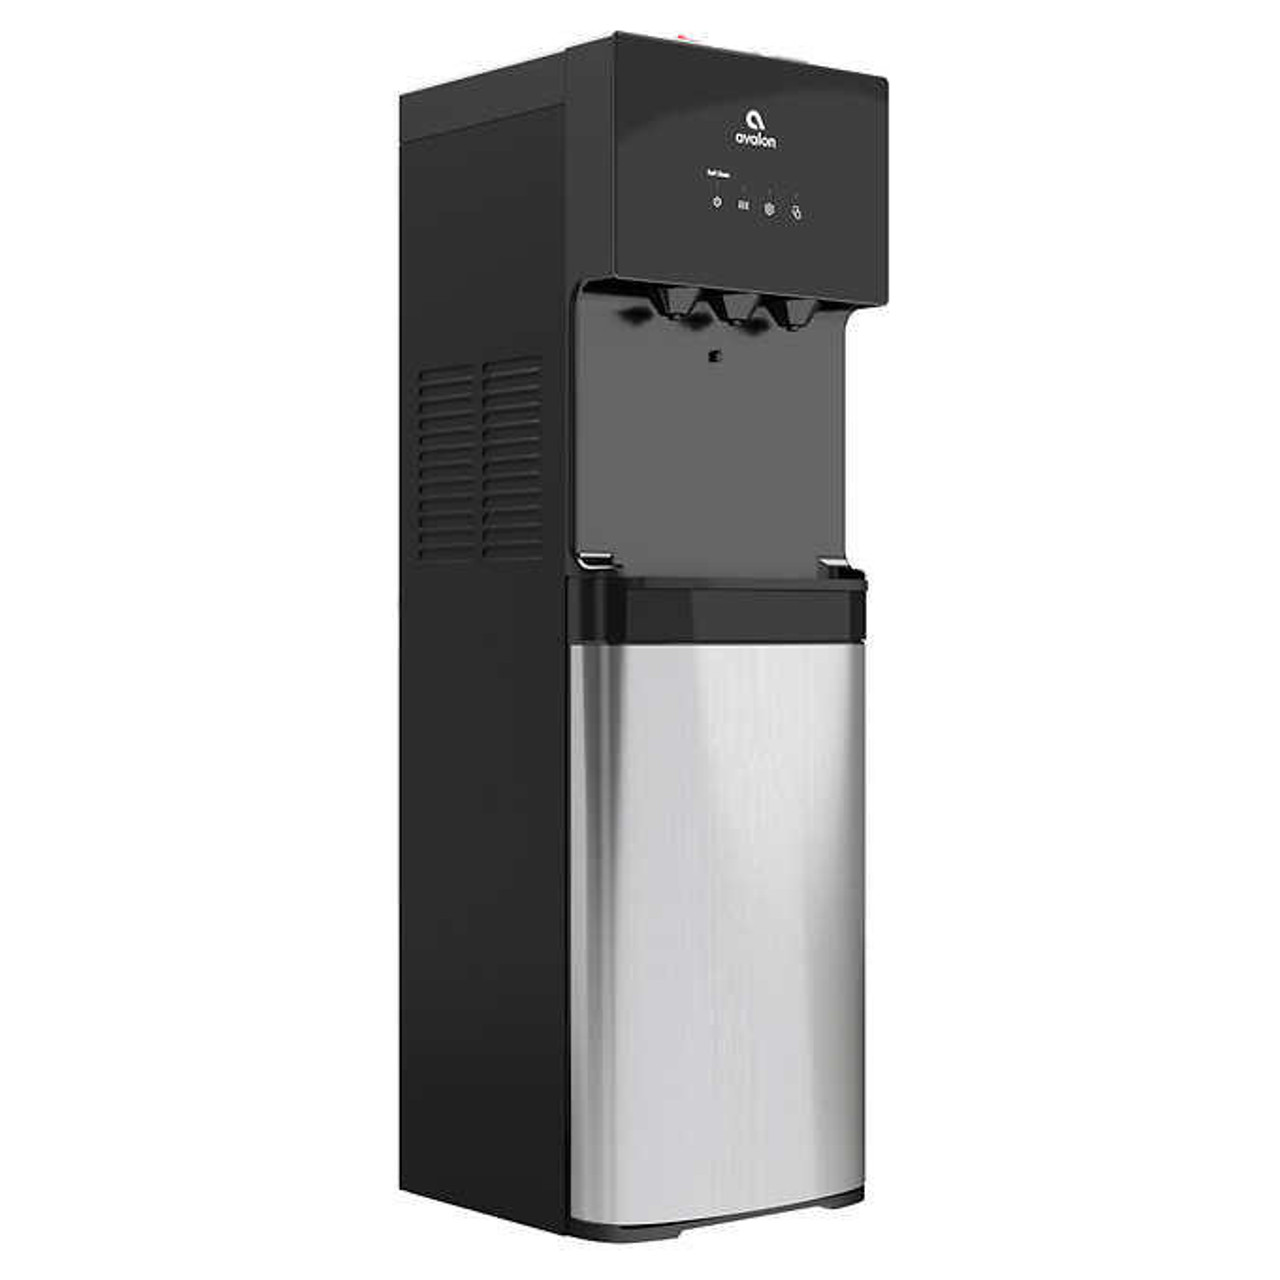  Avalon Stainless Steel, Child Safety Lock Bottom-Loading Water Cooler 